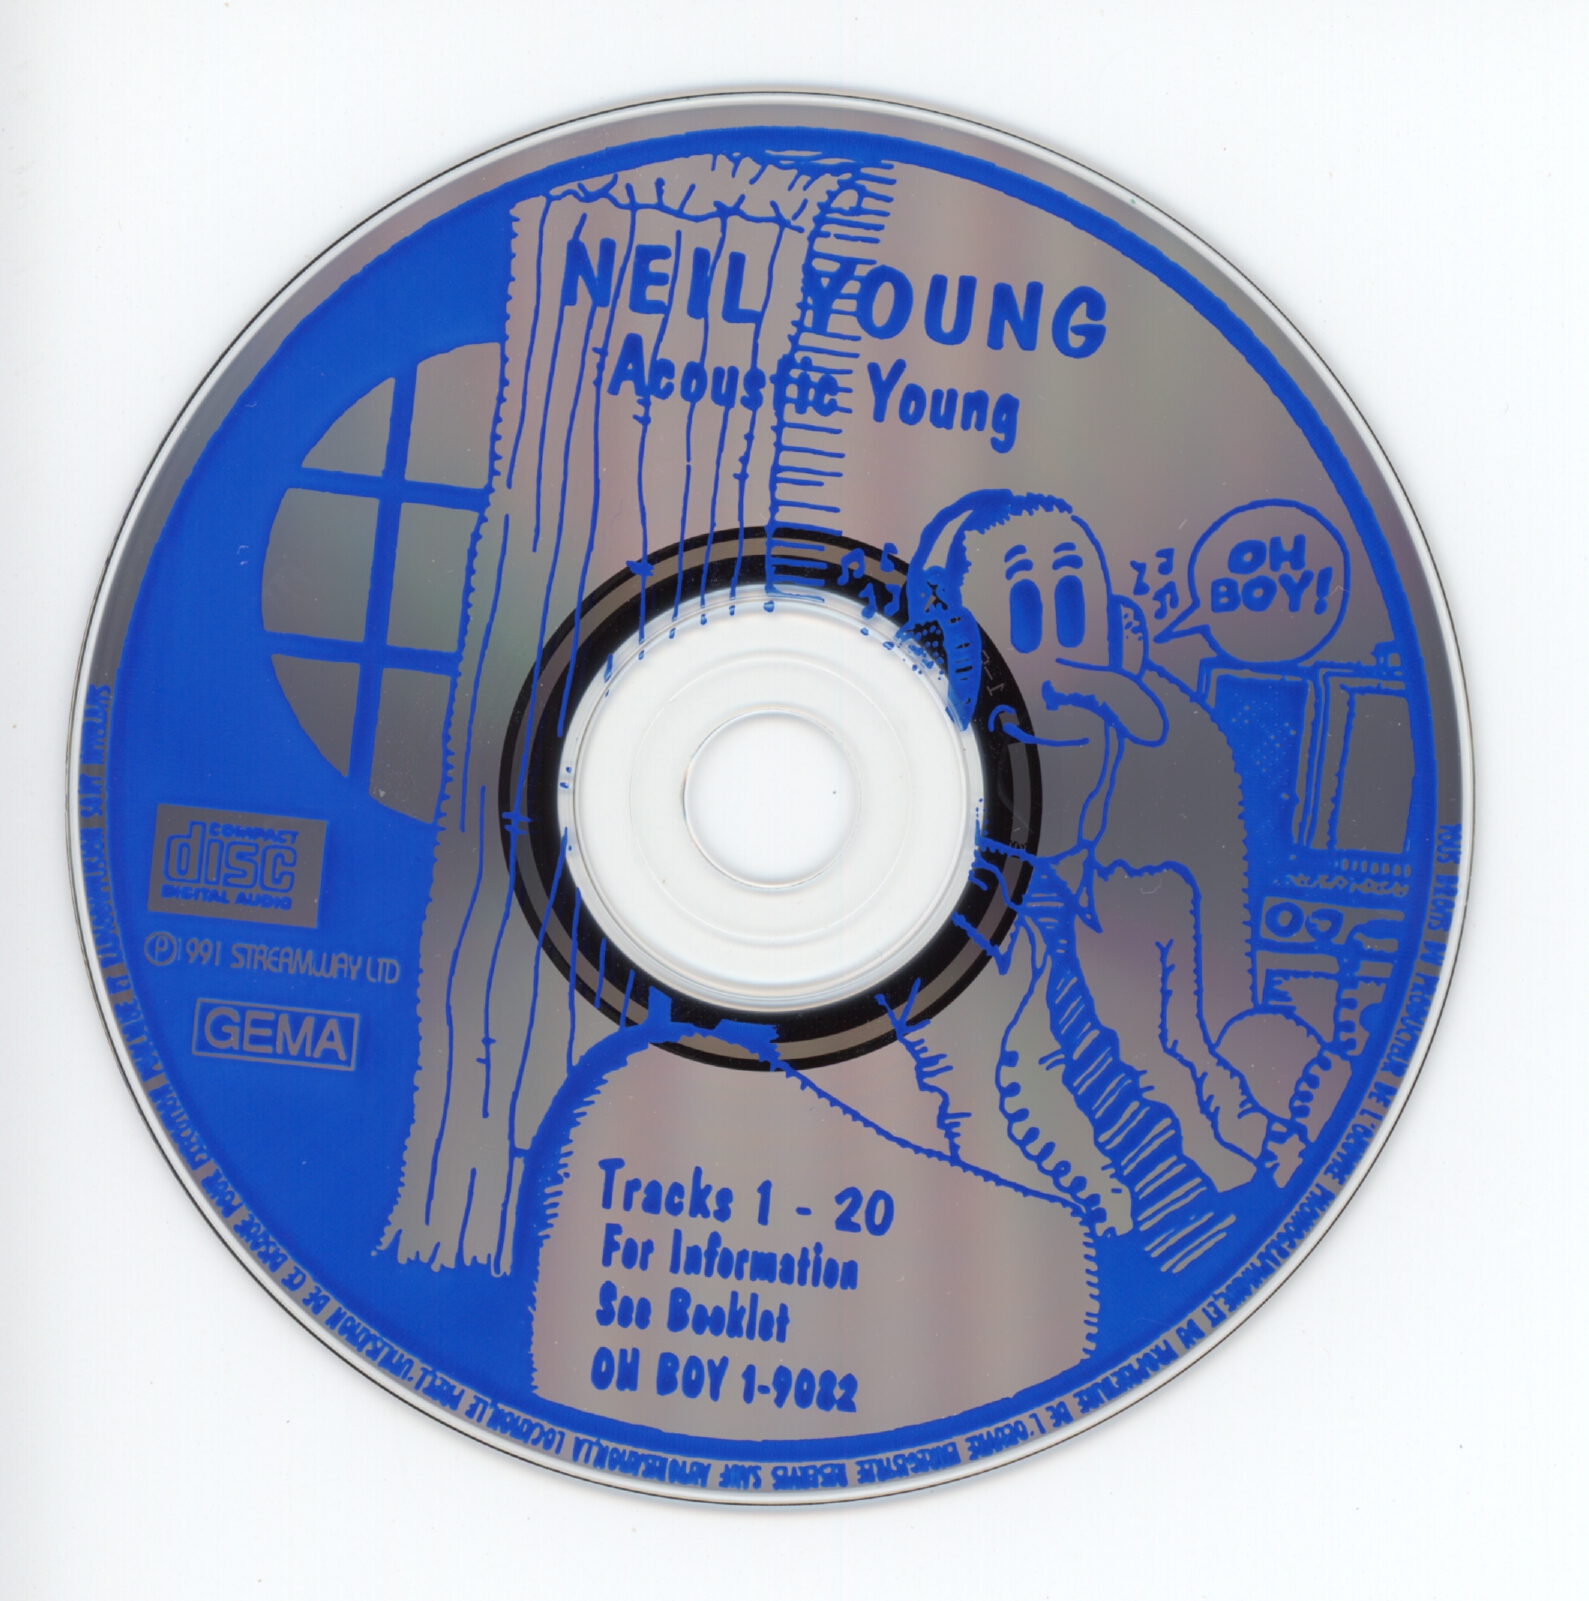 NeilYoung_AcousticYoungBootlegCD (2).jpg